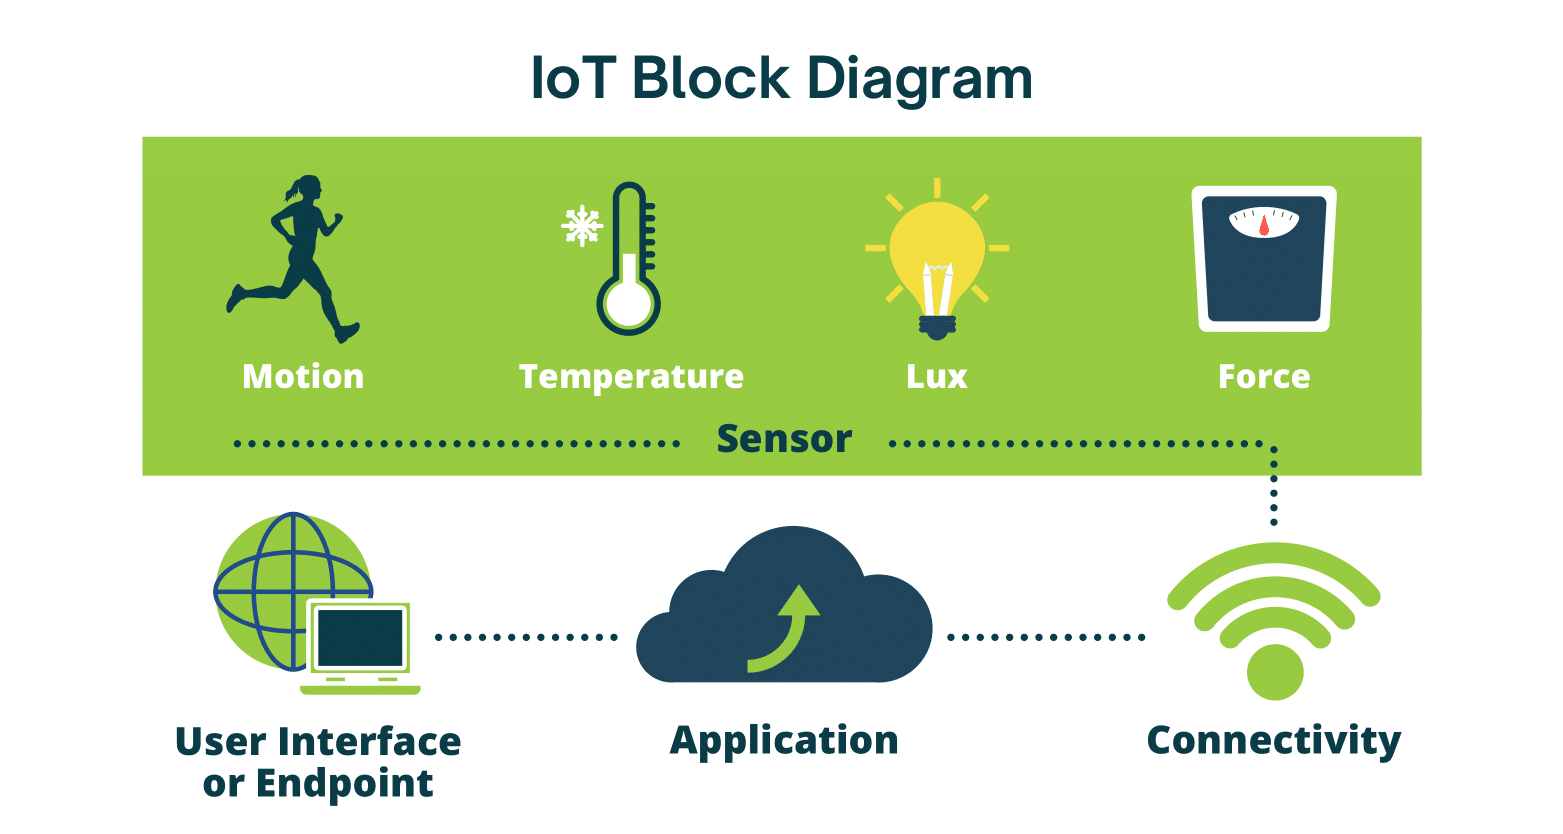 Internet of Things block diagram from sensor to connectivity to cloud application to user interface